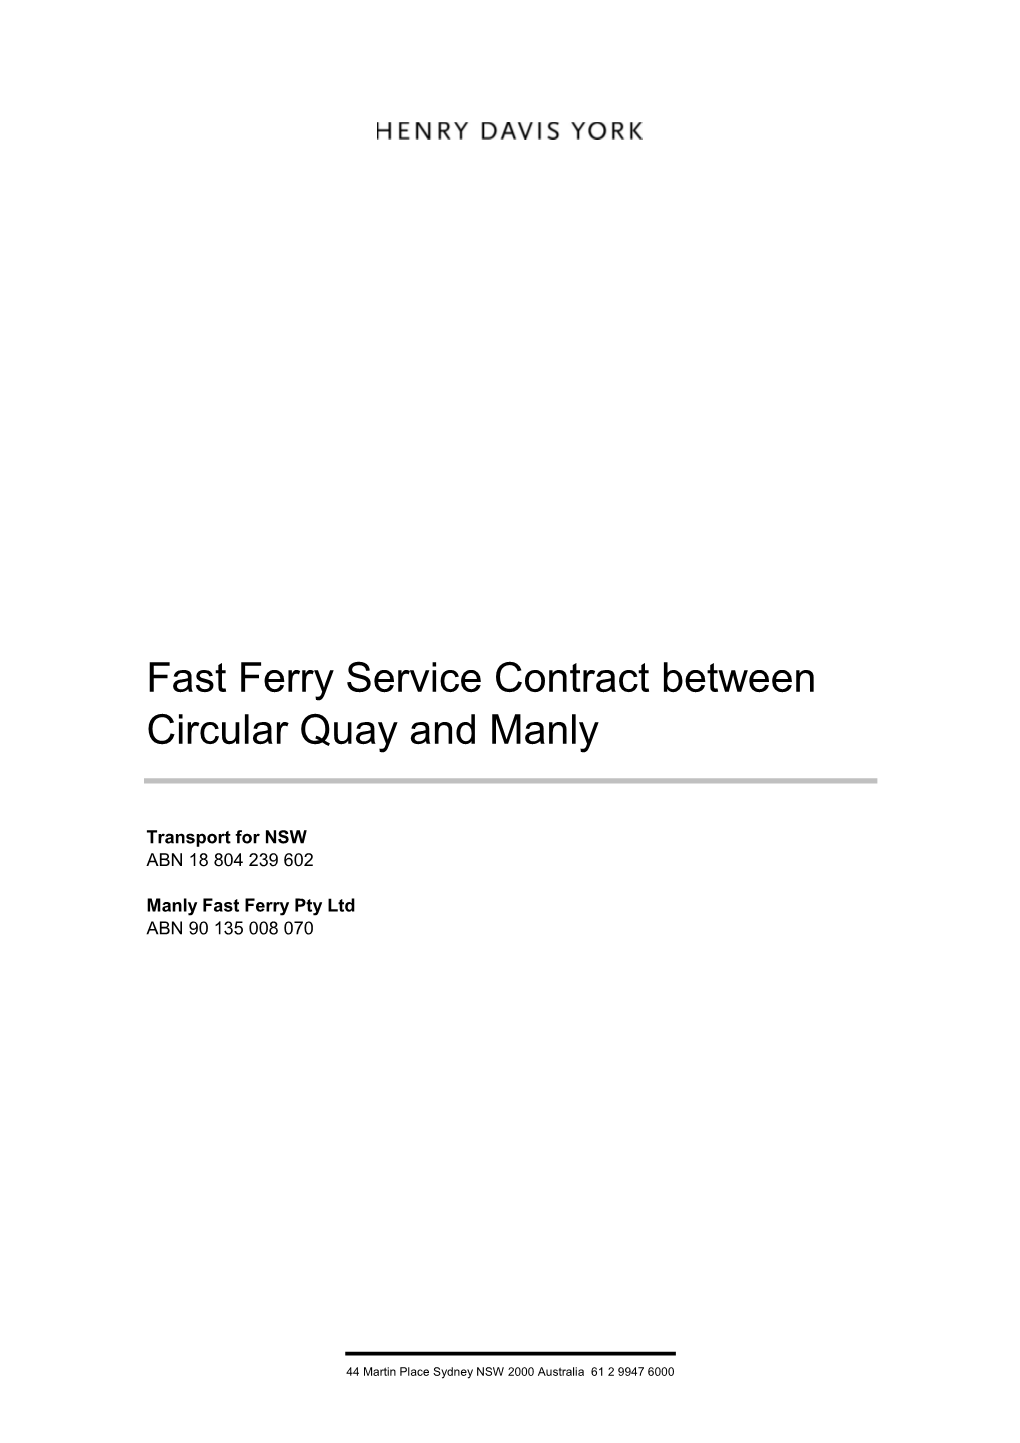 Fast Ferry Service Contract Between Circular Quay and Manly